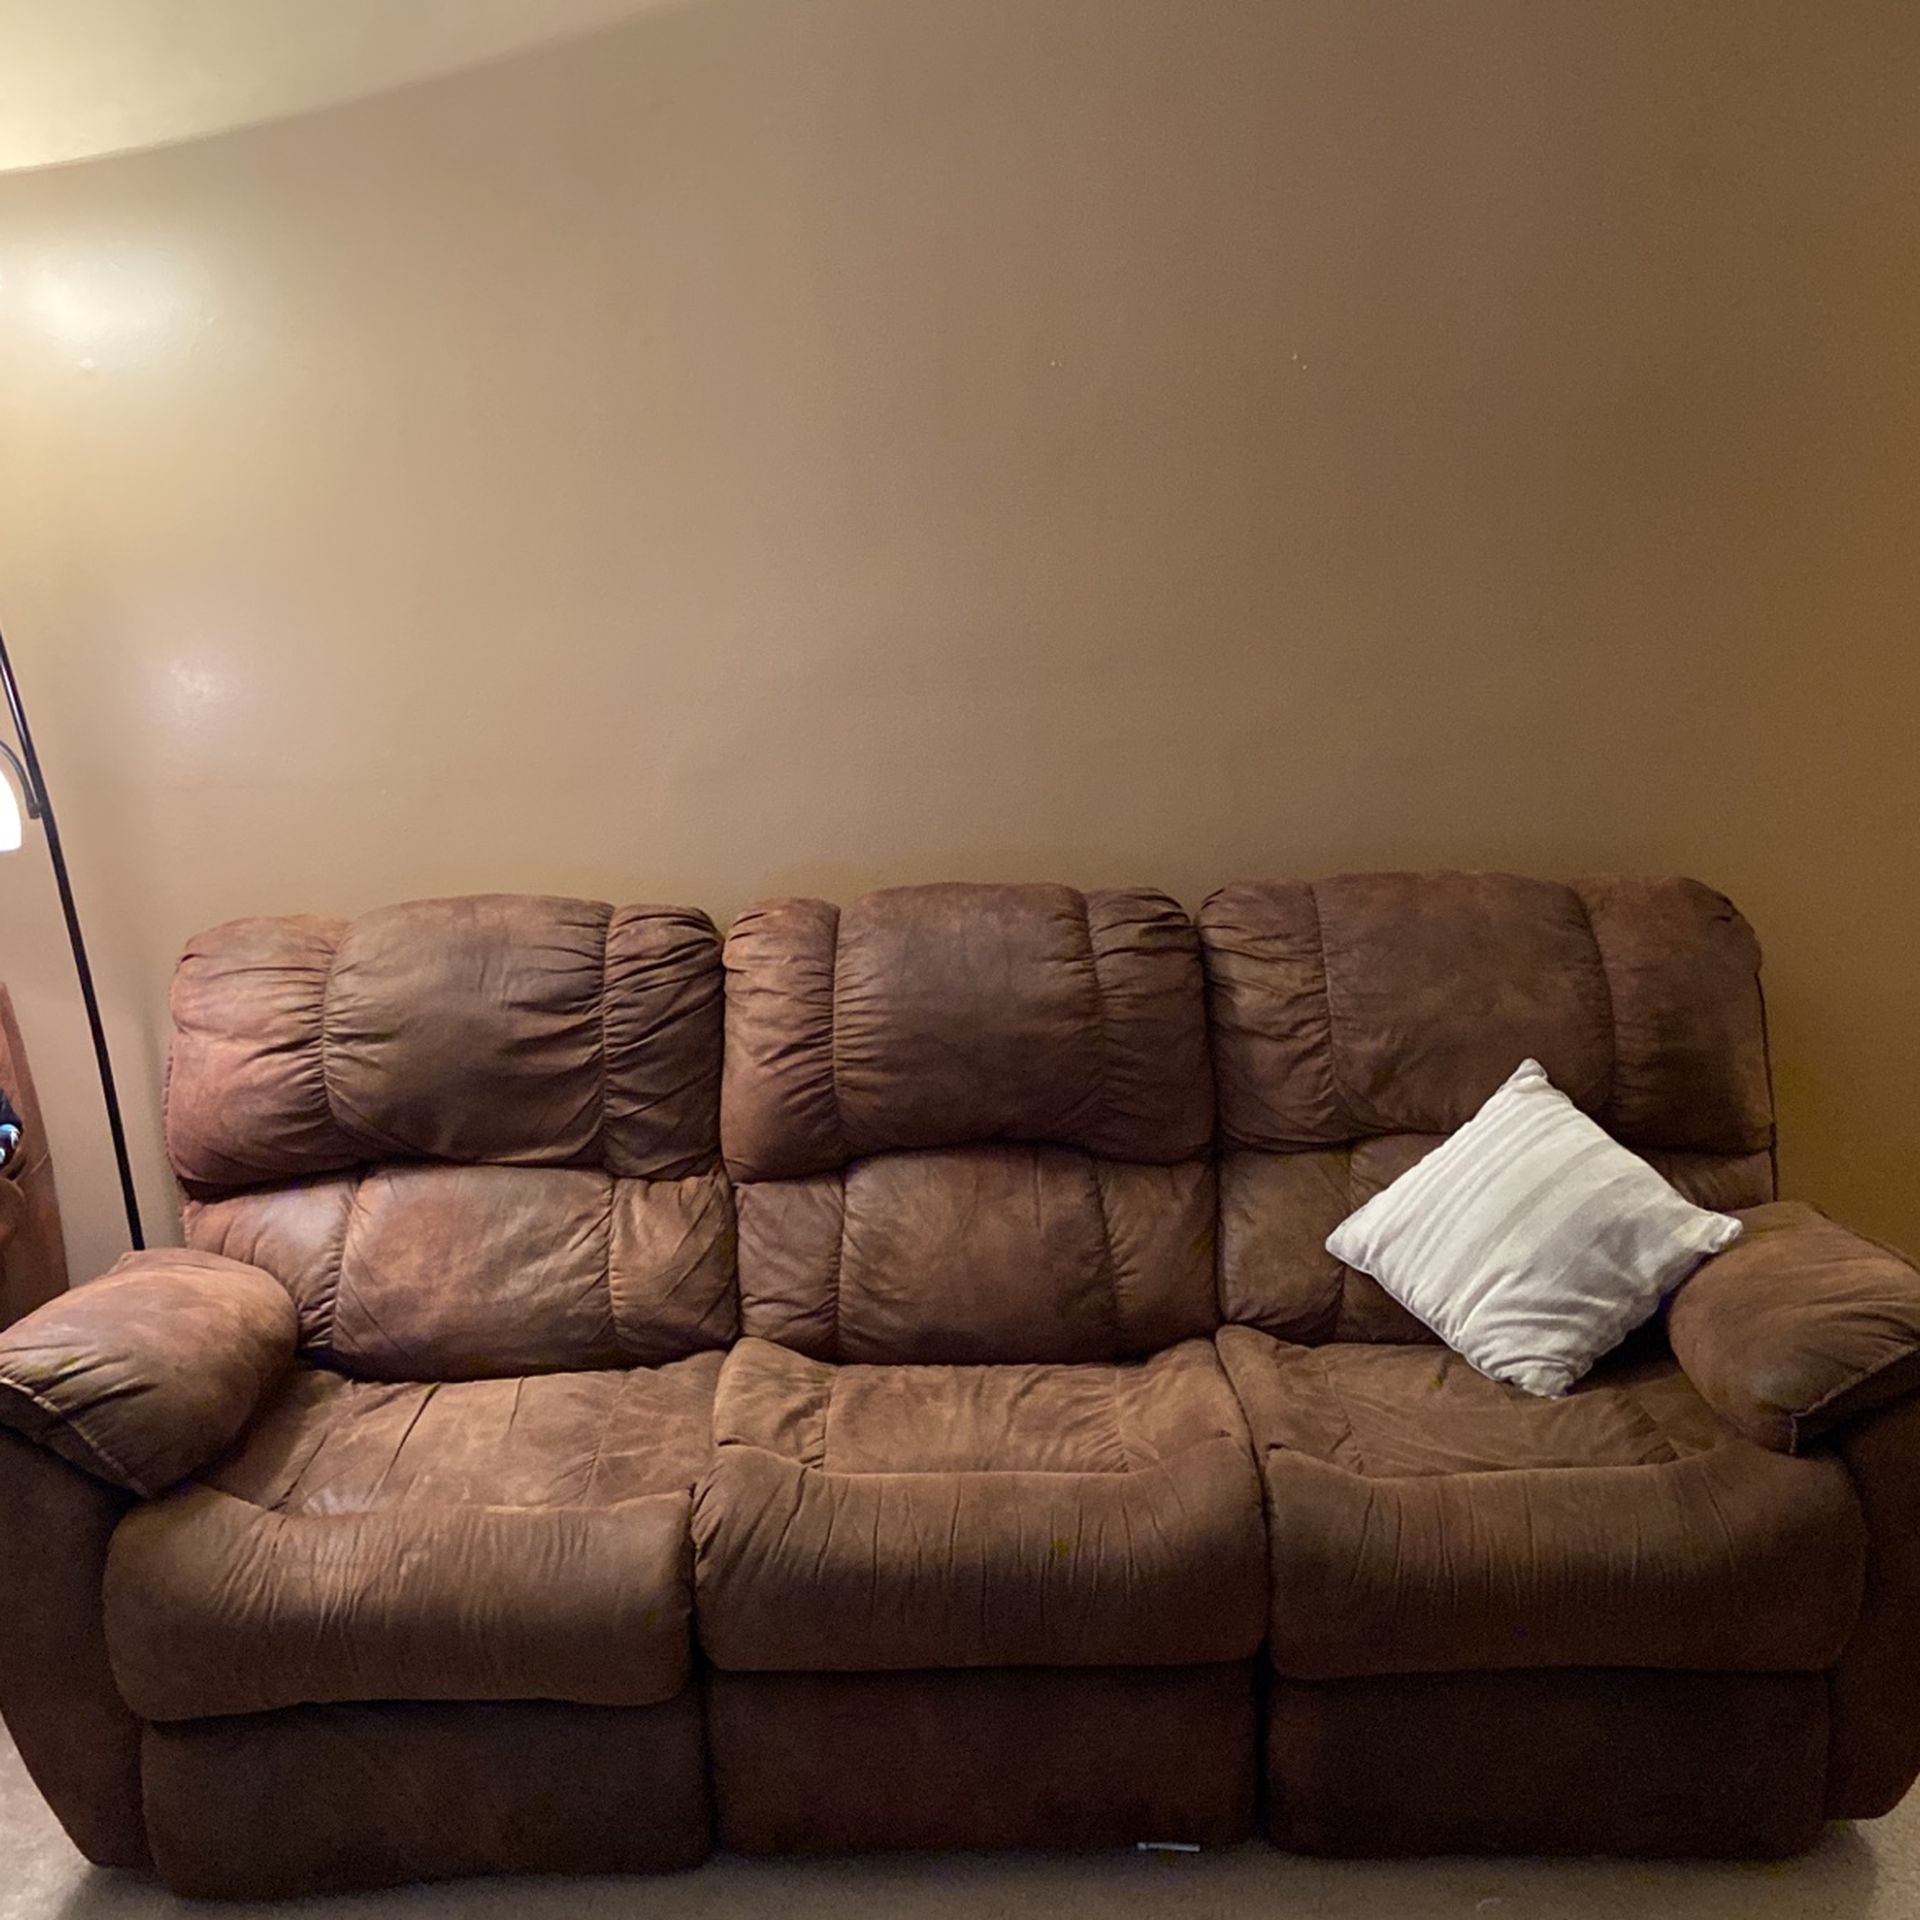 6ft Recliner Couch Amazing Condition 